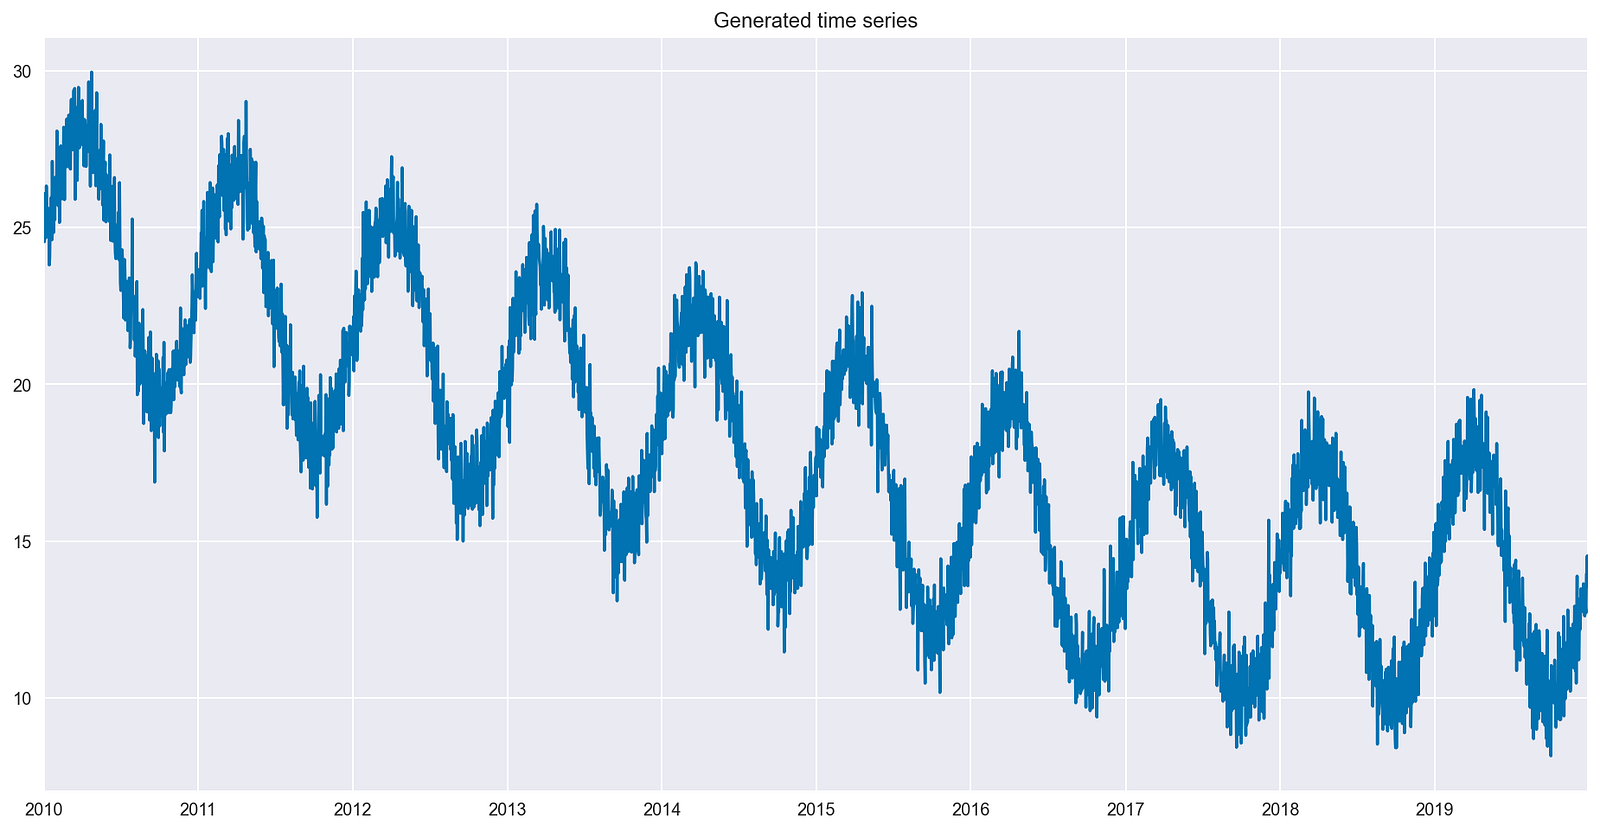 A time series plot including all the desired characteristics, with a slight downward trend over time and containing multiple increases and decreases